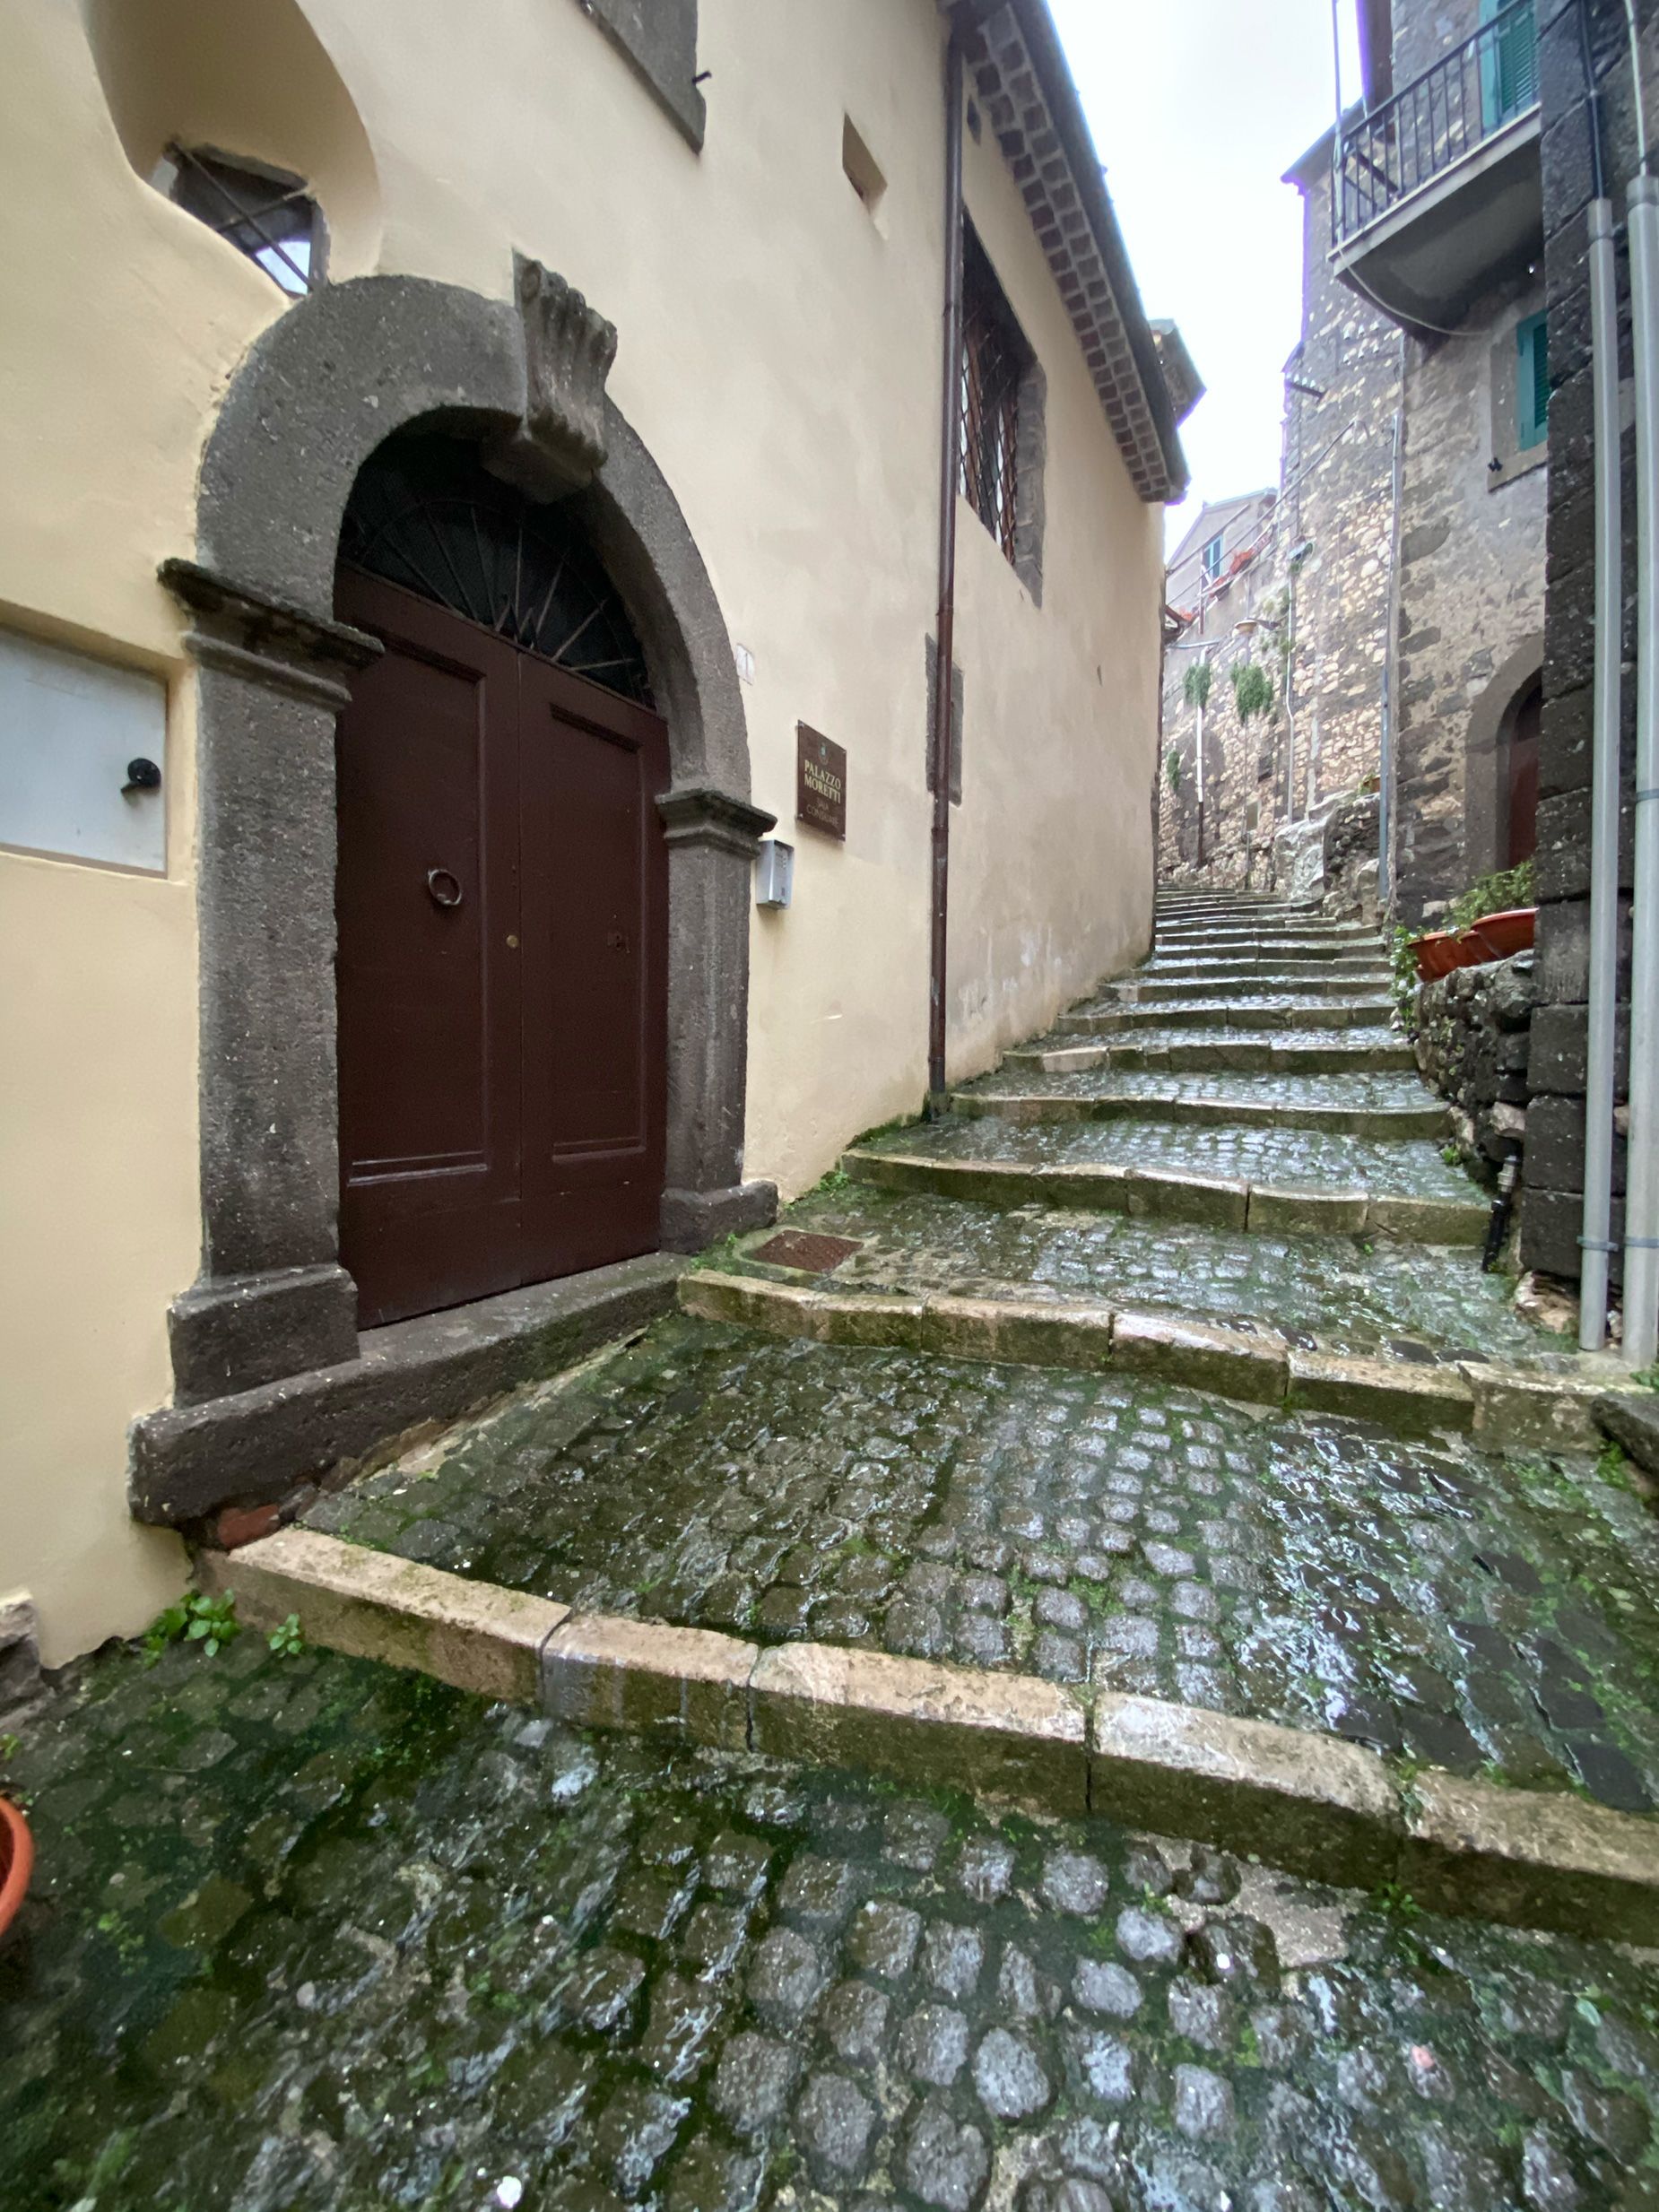 Are Italian homes really some of the smallest in Europe?